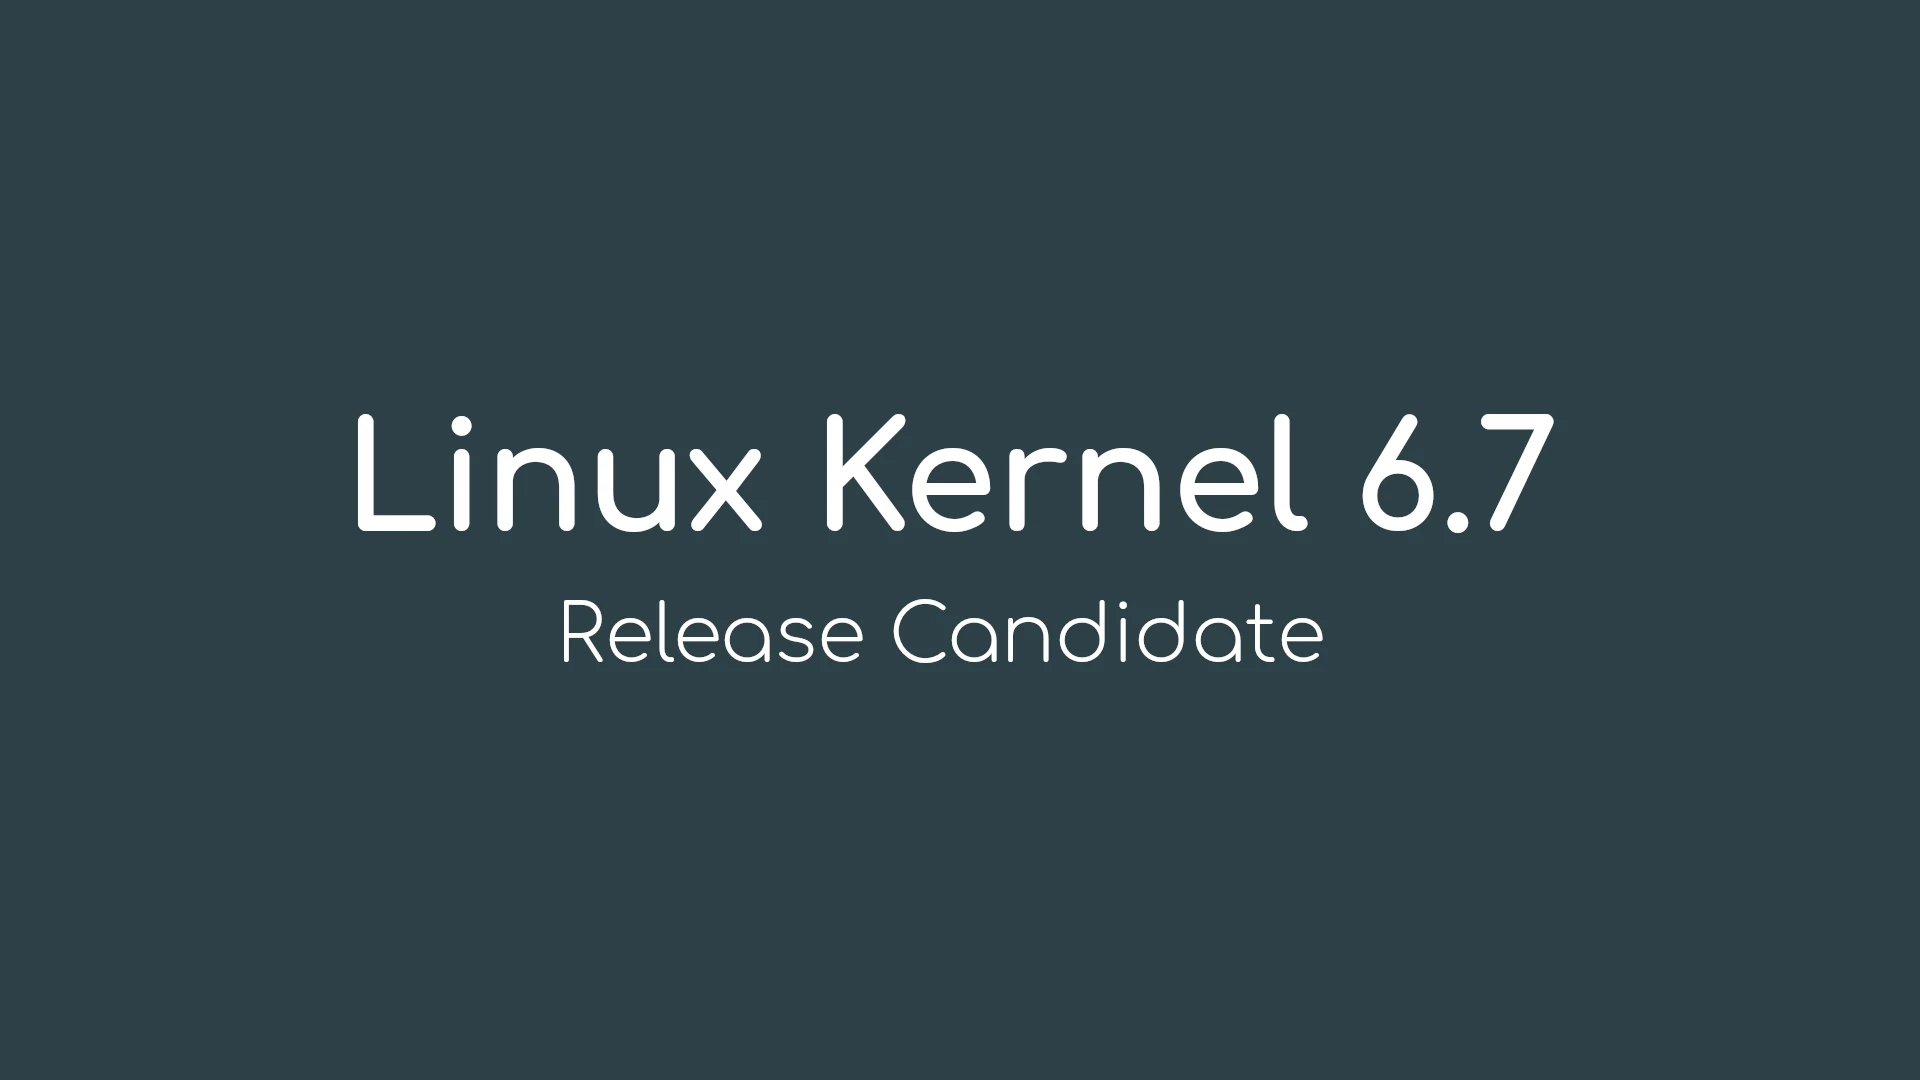 Linus Torvalds Announces First Linux Kernel 6.7 Release Candidate